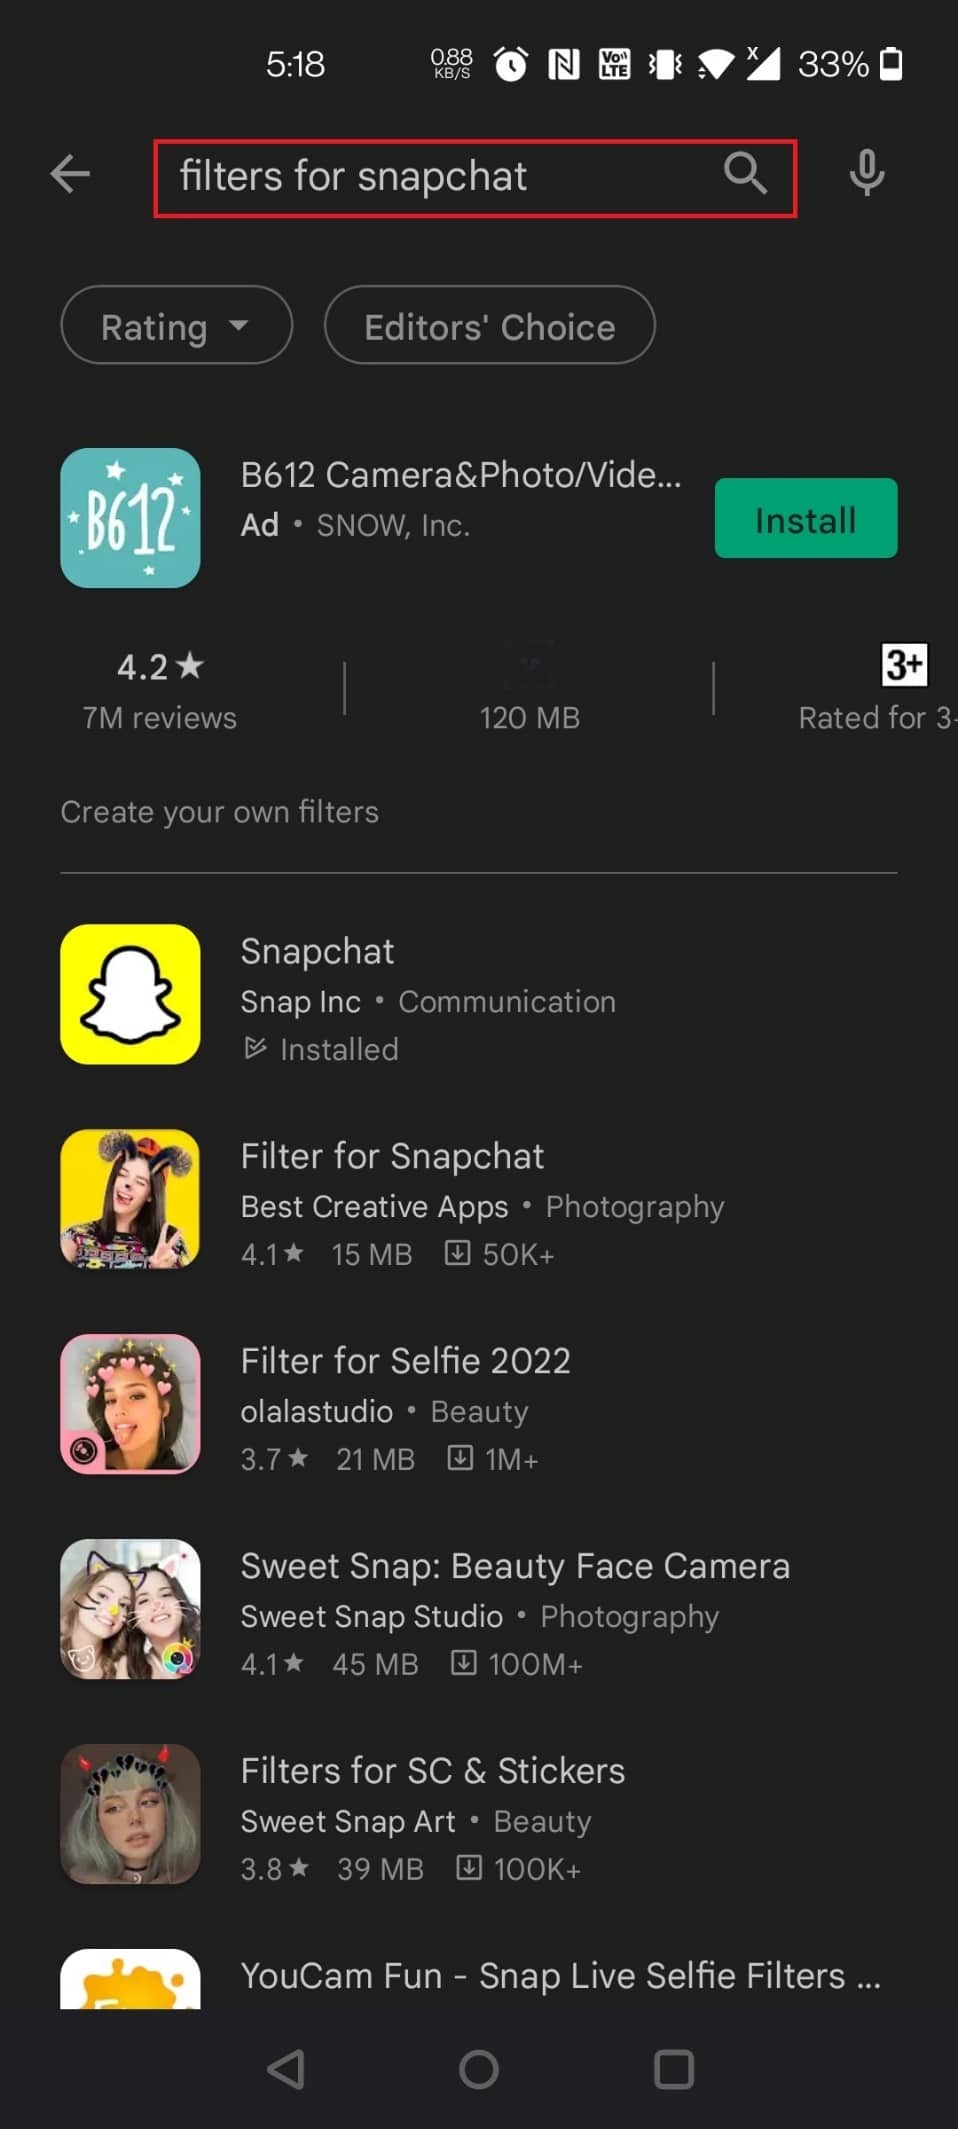 search for filters for Snapchat in the search box